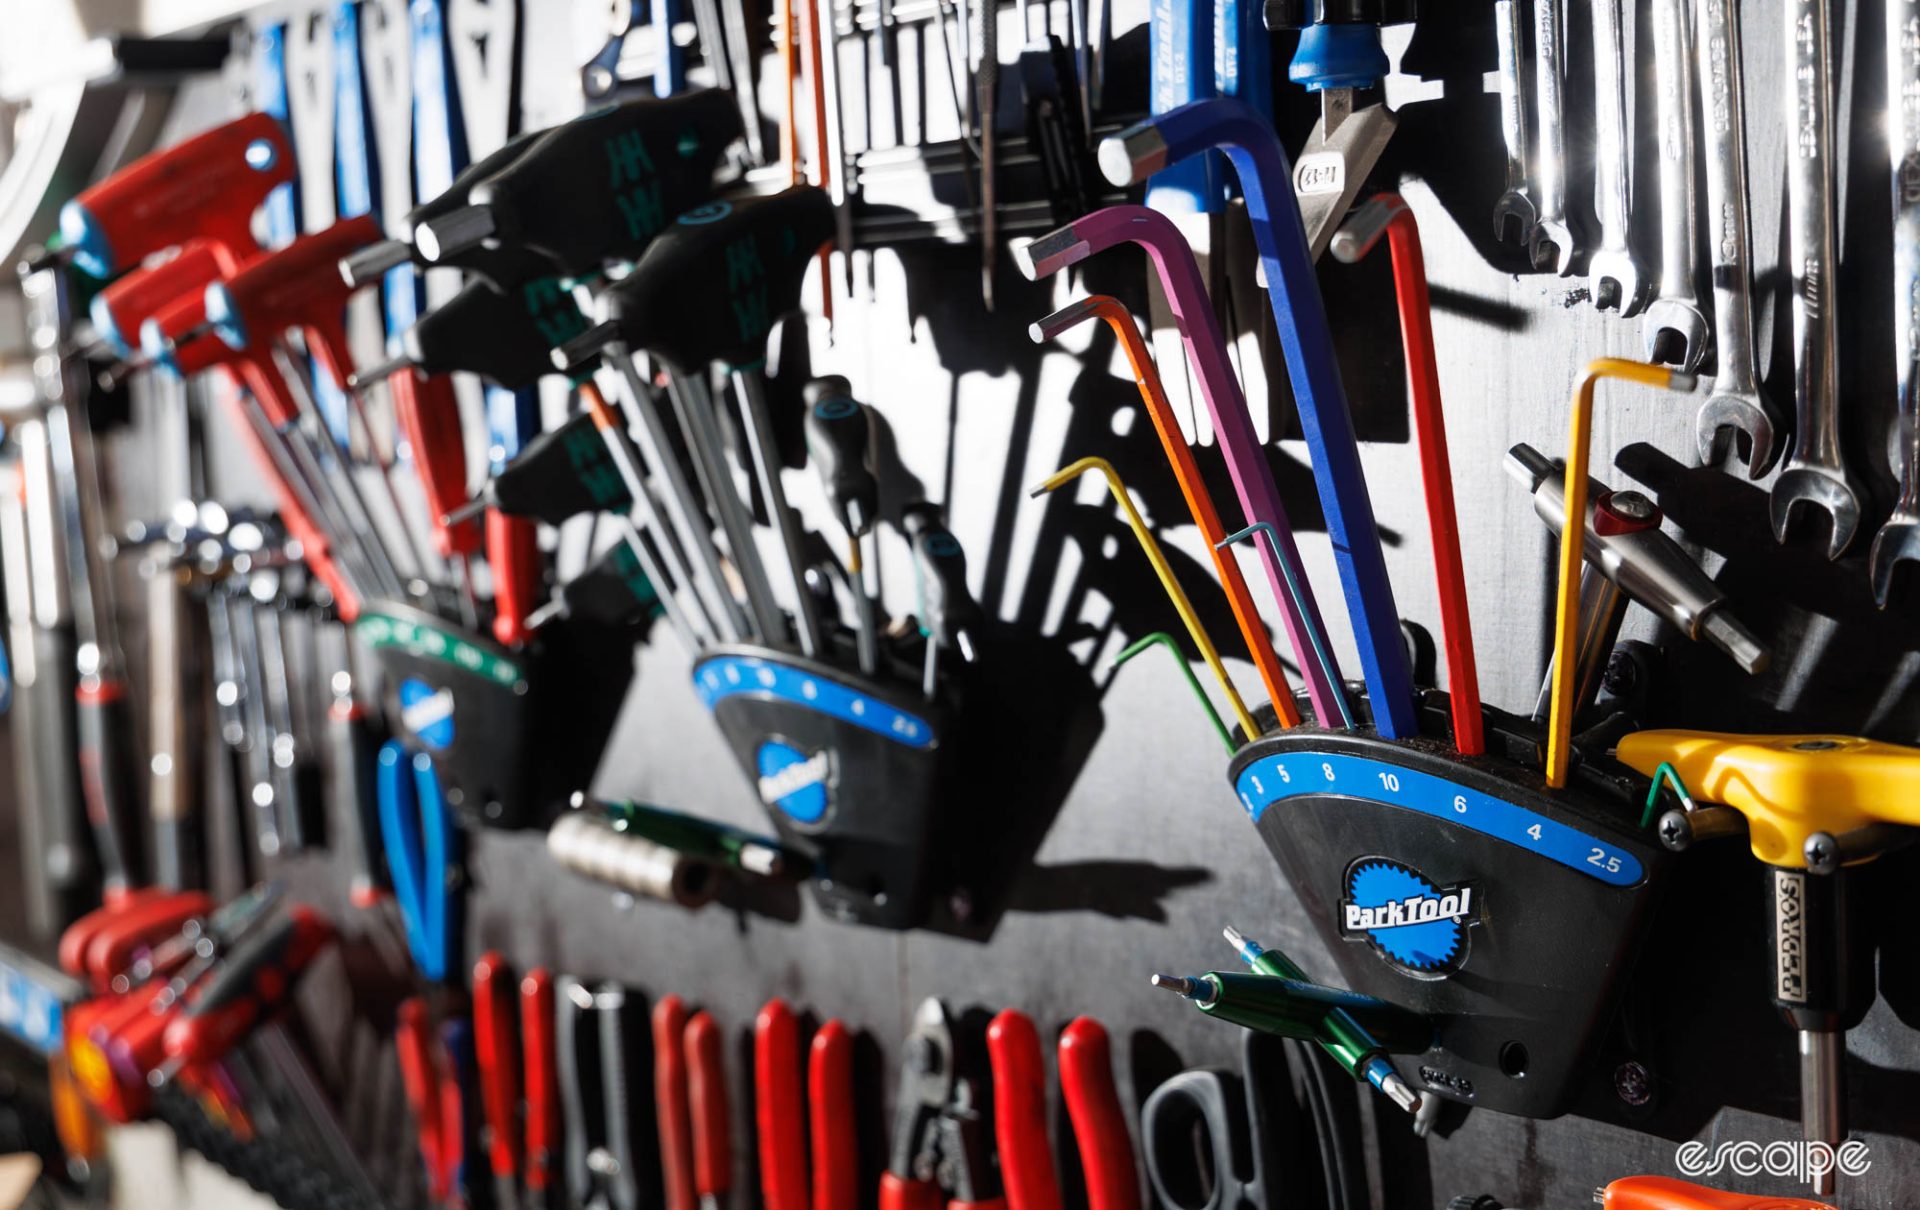 A wall of tools with three Park Tool hex key and Torx key holders shown. 